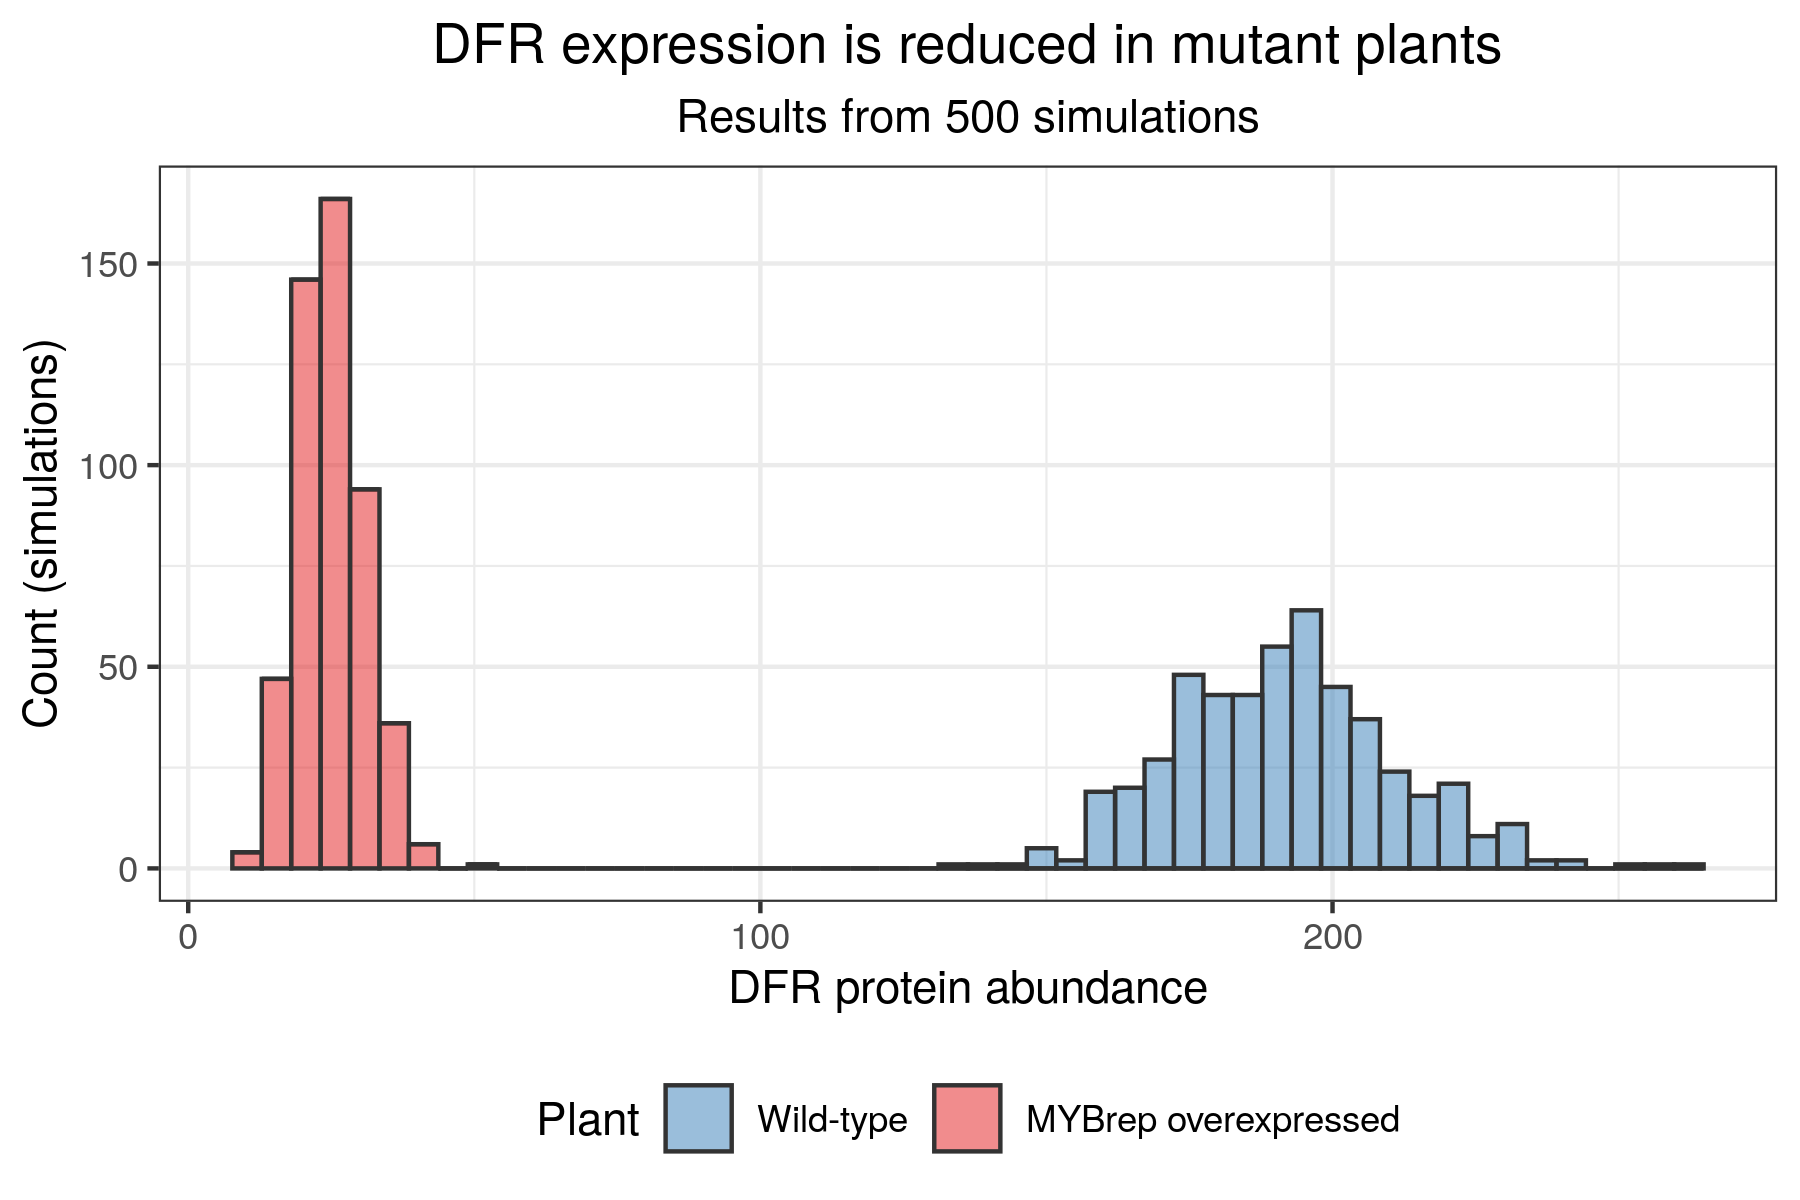 DFR protein abundance in the two plants